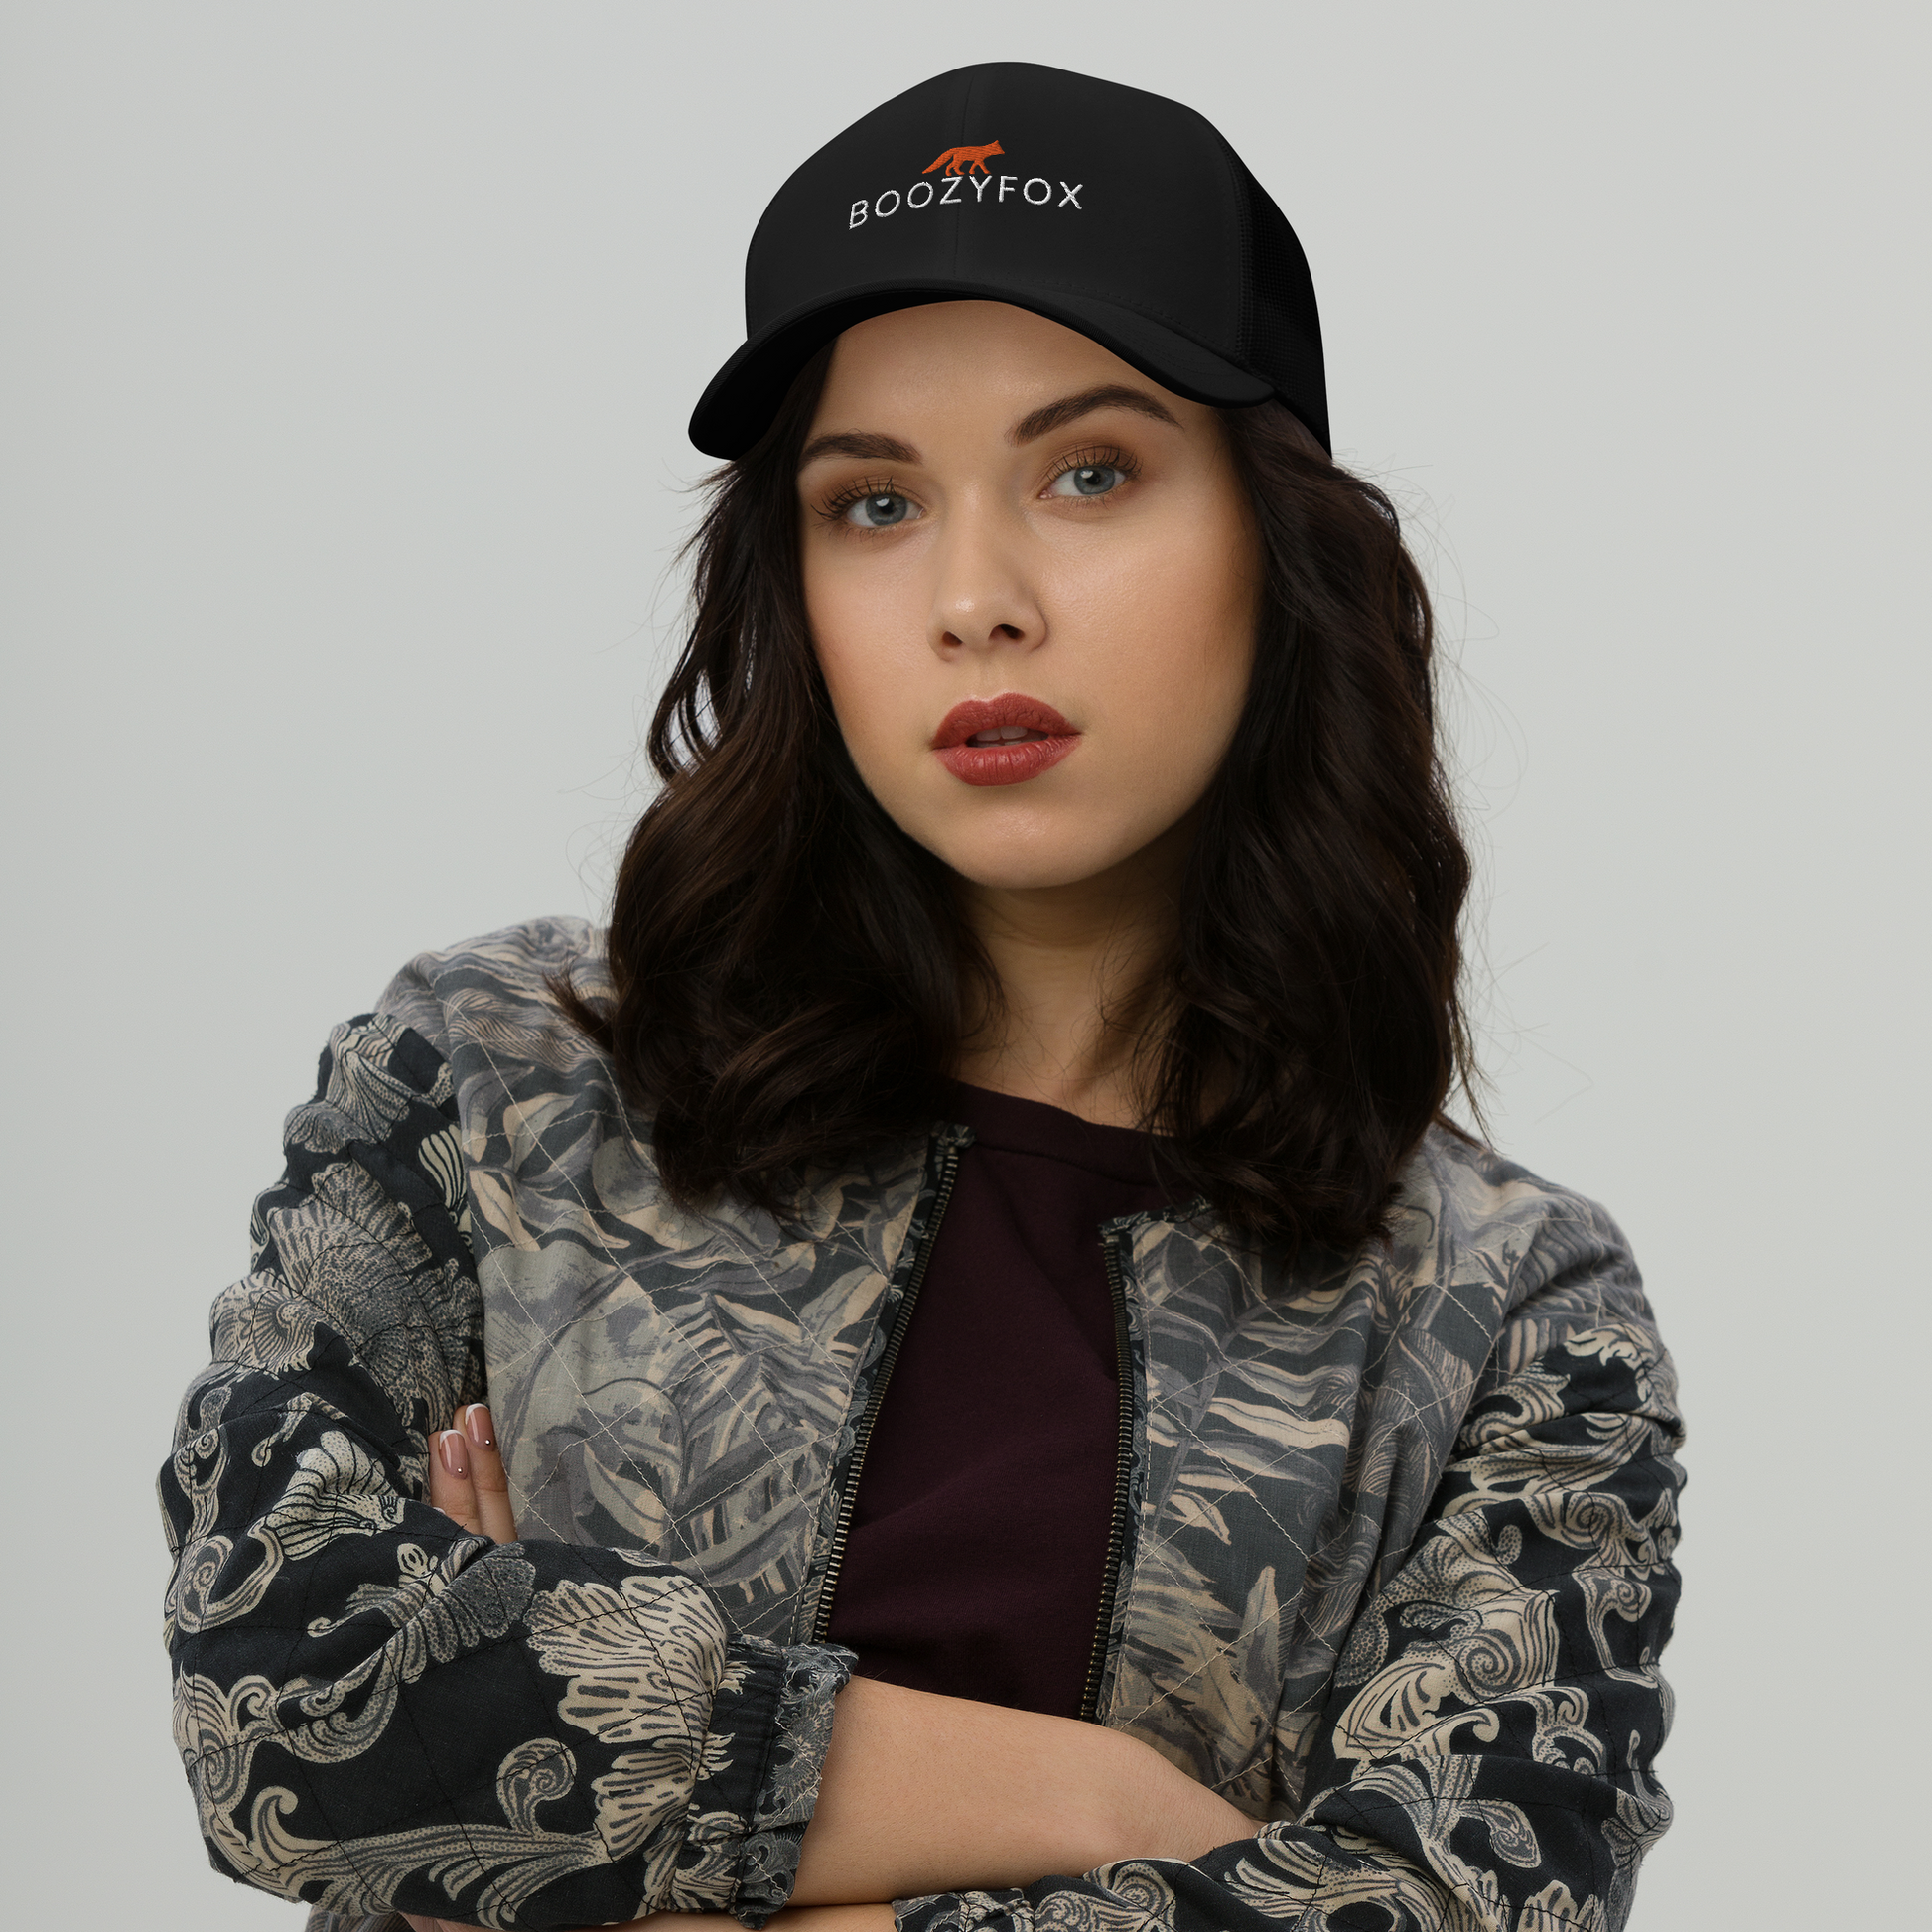 Woman Wearing Black Retro Trucker Hat featuring an embroidered Boozy Fox logo on front 